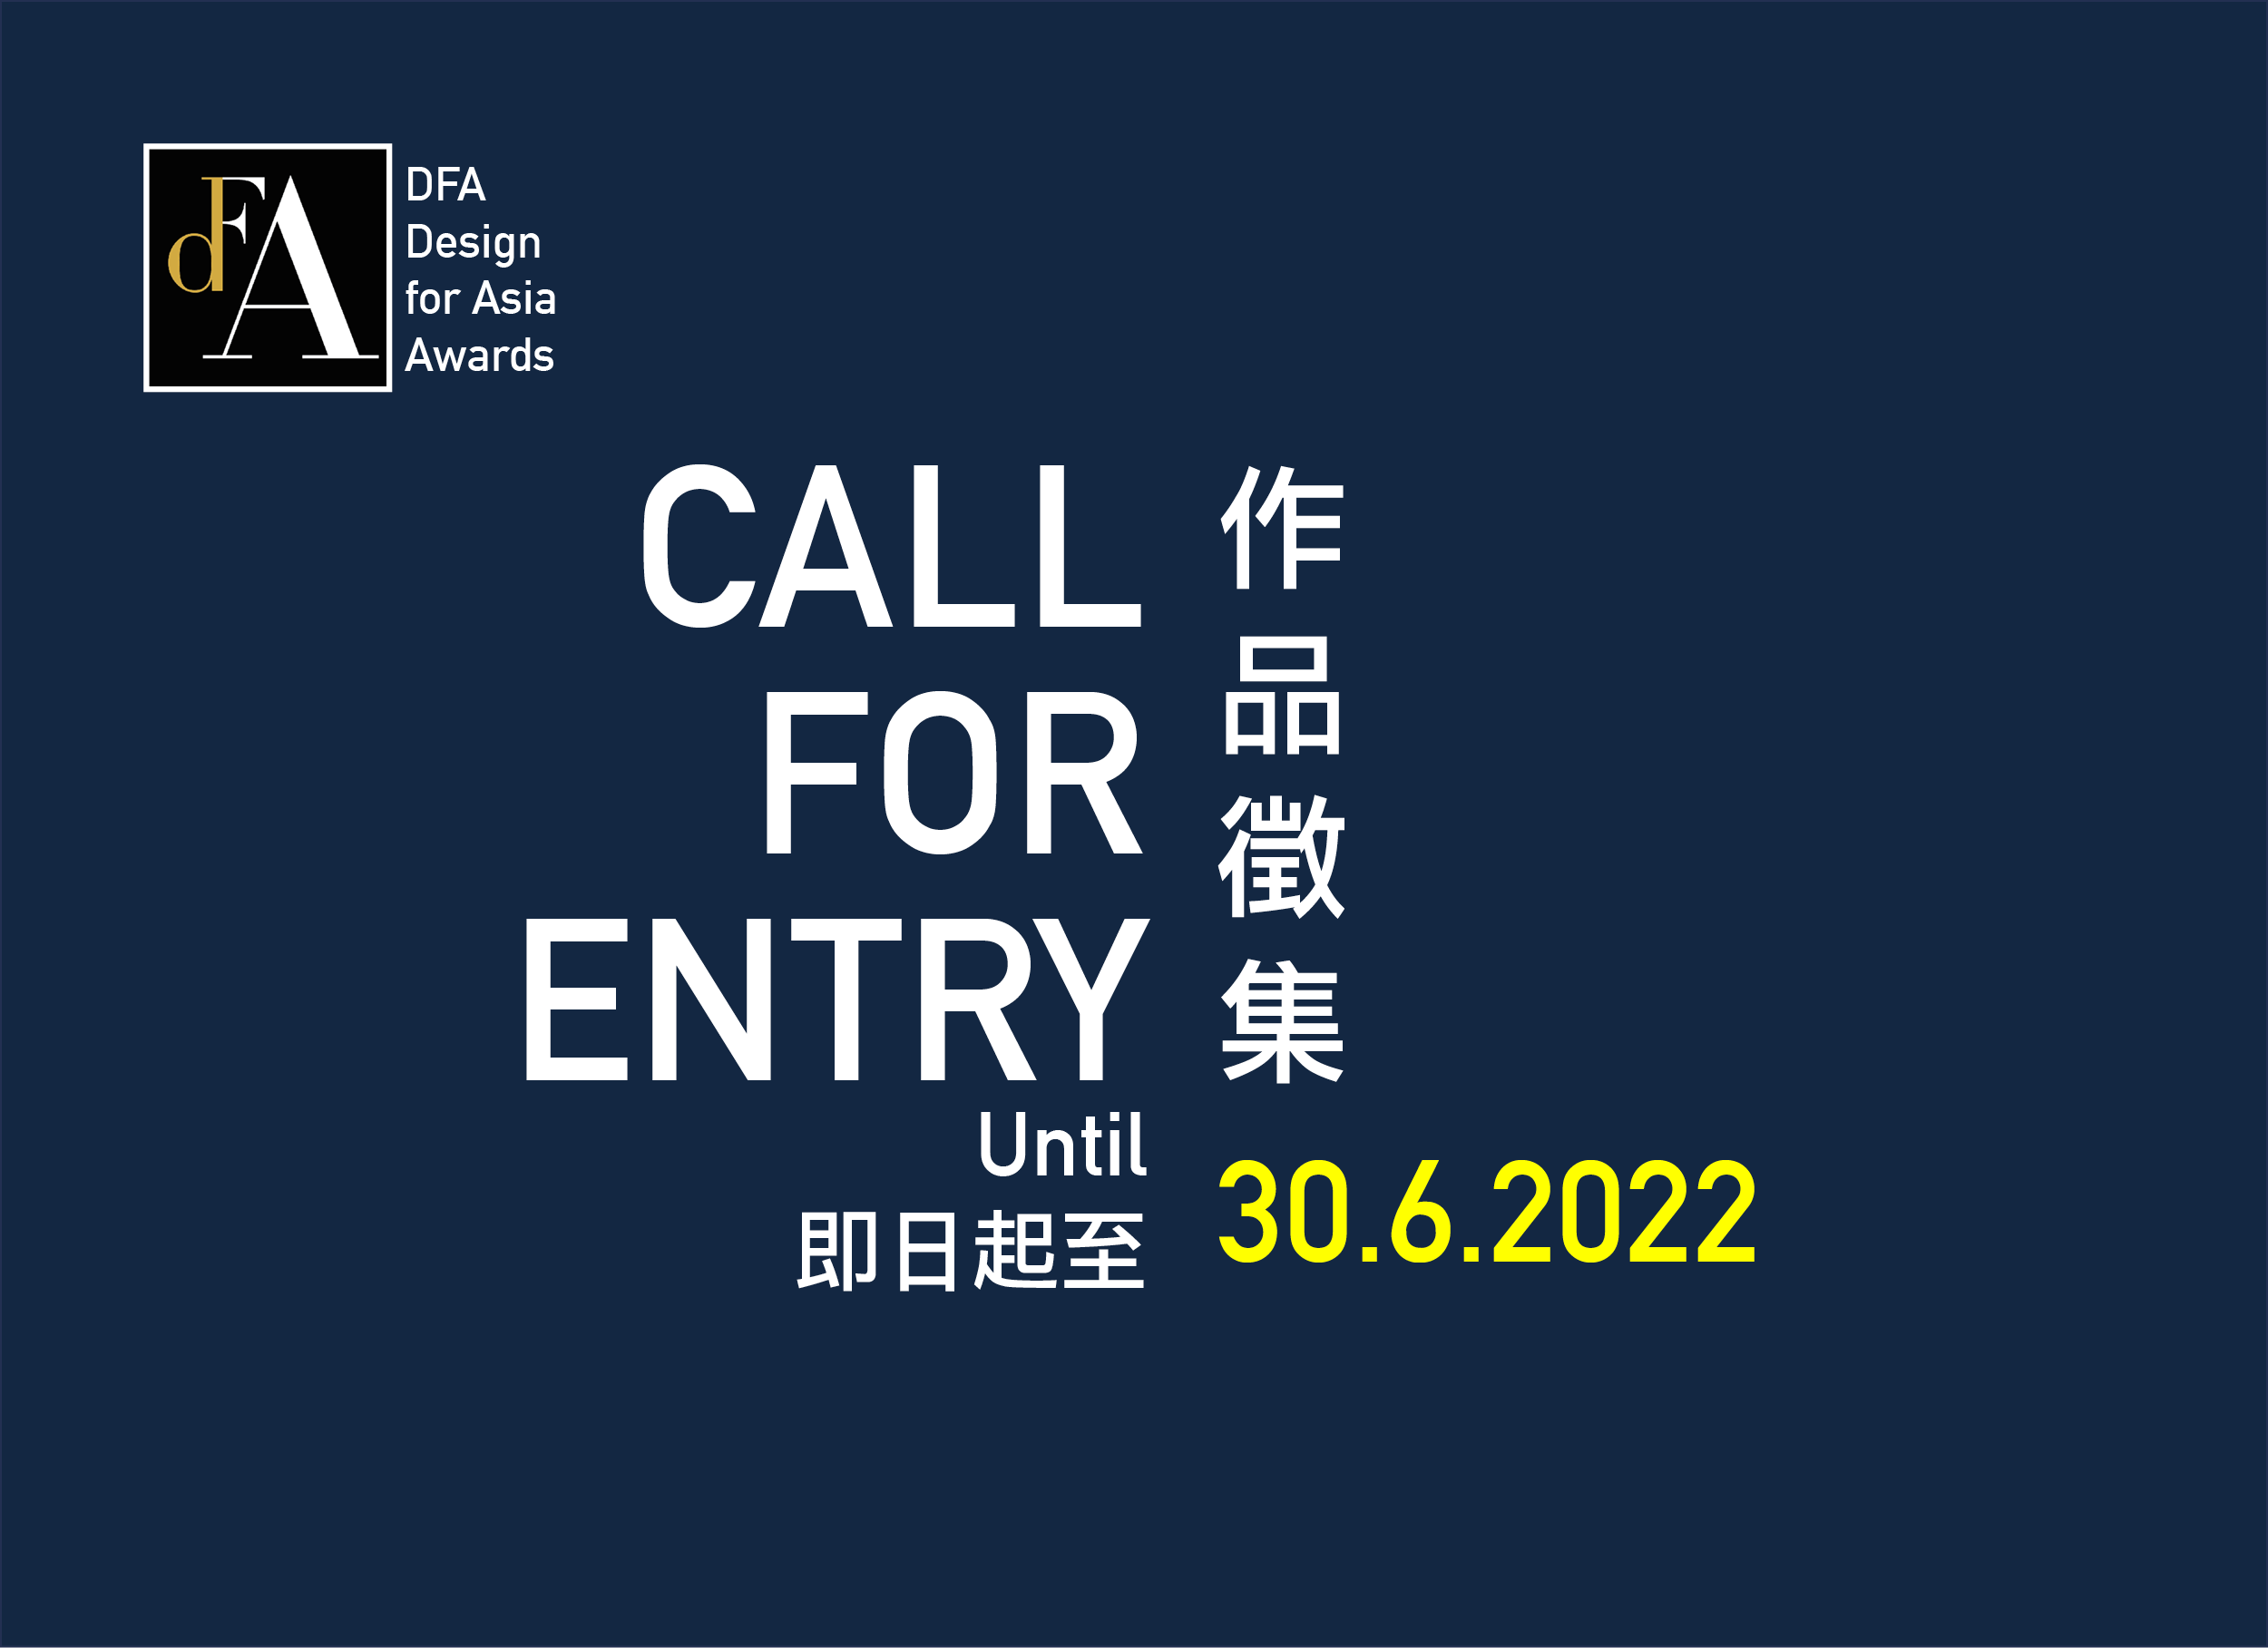 DFA Design for Asia Awards 2022 Opens for Global Submission from Now, Entry Fee 50% Off until 30 April - New “Digital & Motion Design” and “Service & Experience Design” disciplines added for wider project range